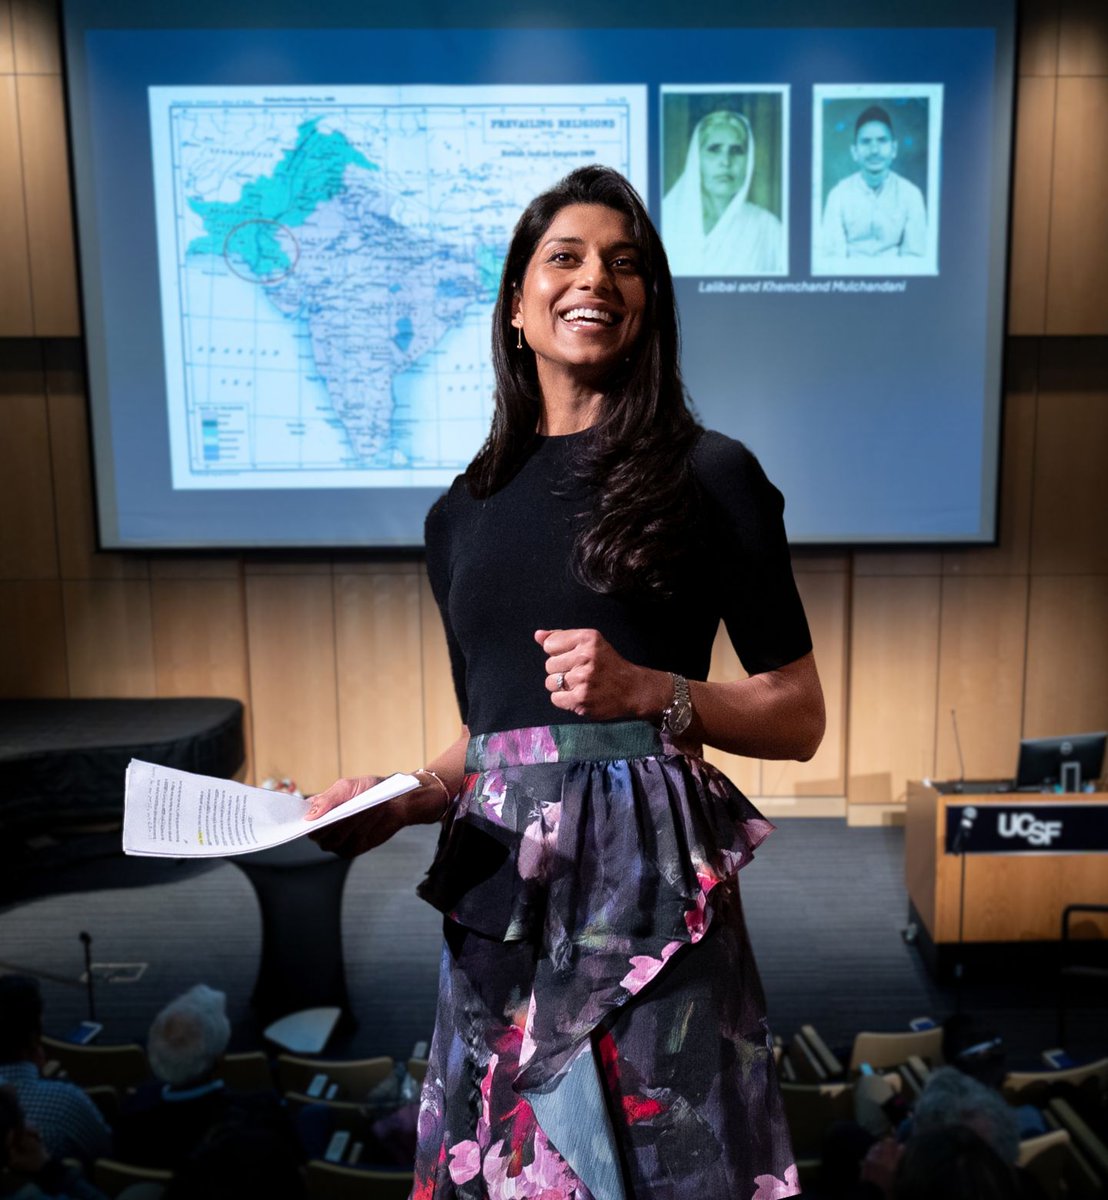 Find out how @UCSF Dept. of Cellular and Molecular Pharmacology faculty member Rupa Tuan, PhD, who also teaches pharmacology at @UCSFMedicine and @ucsfdentistry, answered the question: If you had but one lecture to give, what would you say? tiny.ucsf.edu/rpxTor